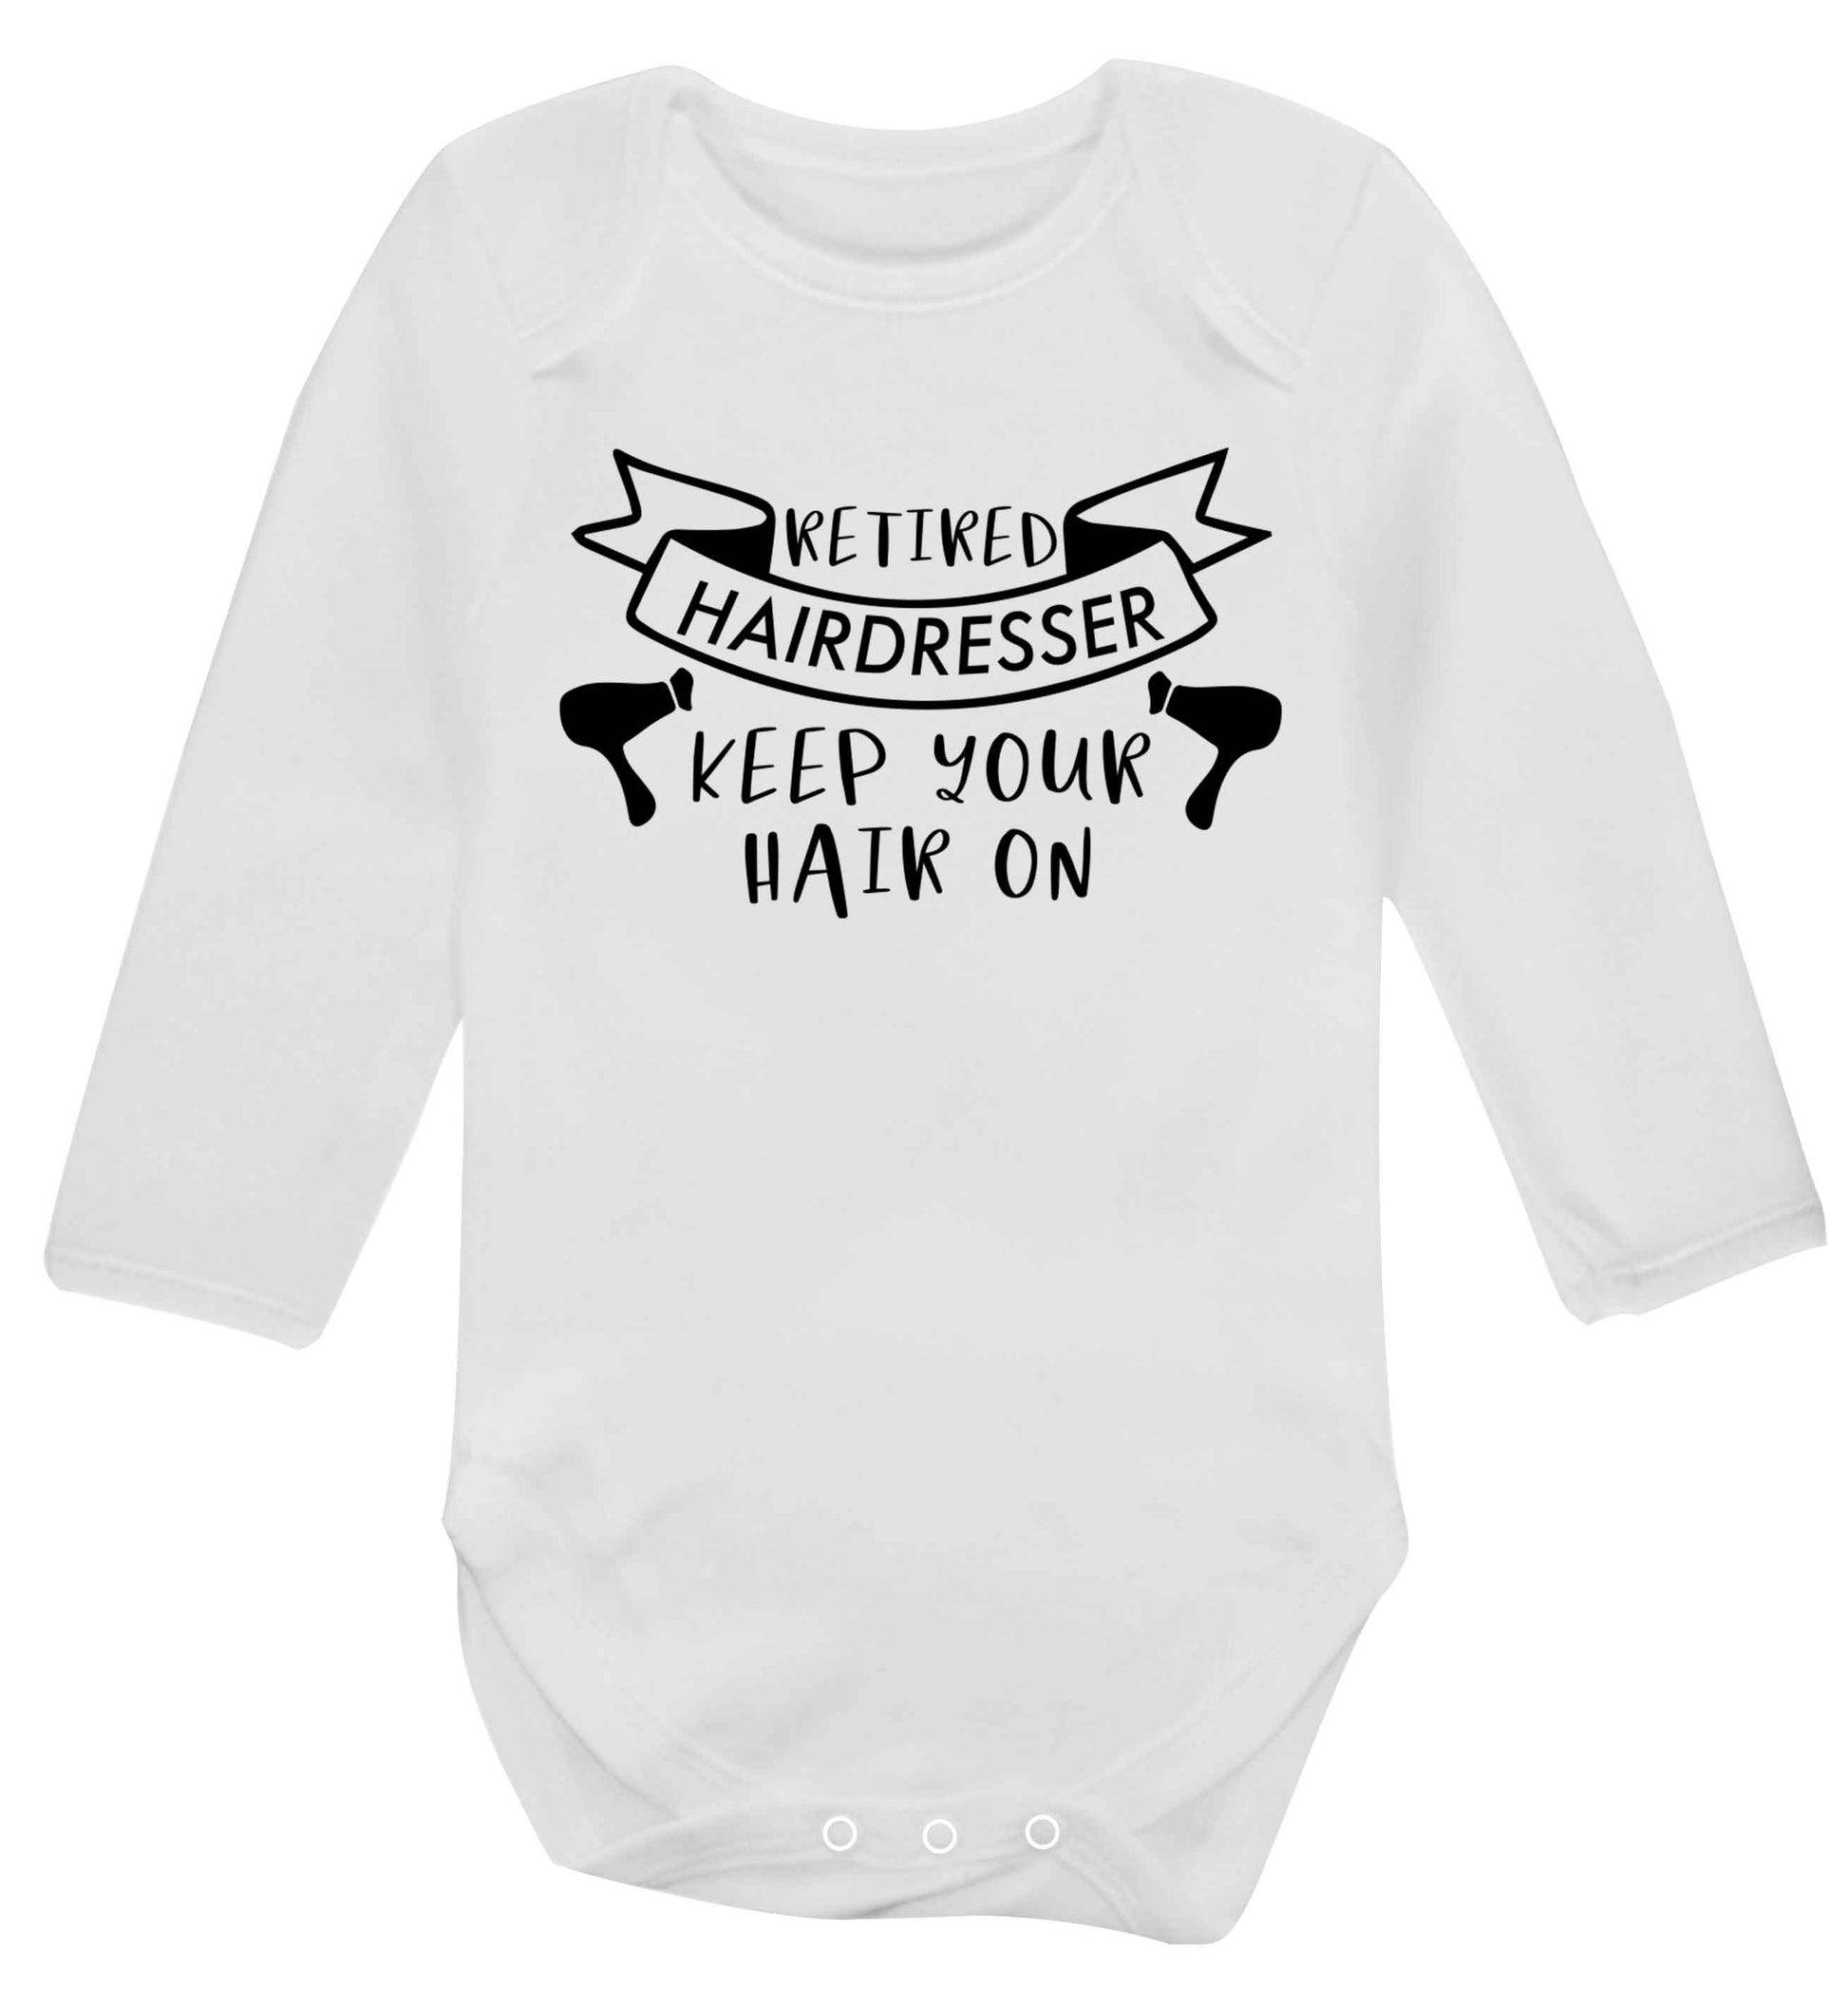 Retired hairdresser keep your hair on Baby Vest long sleeved white 6-12 months